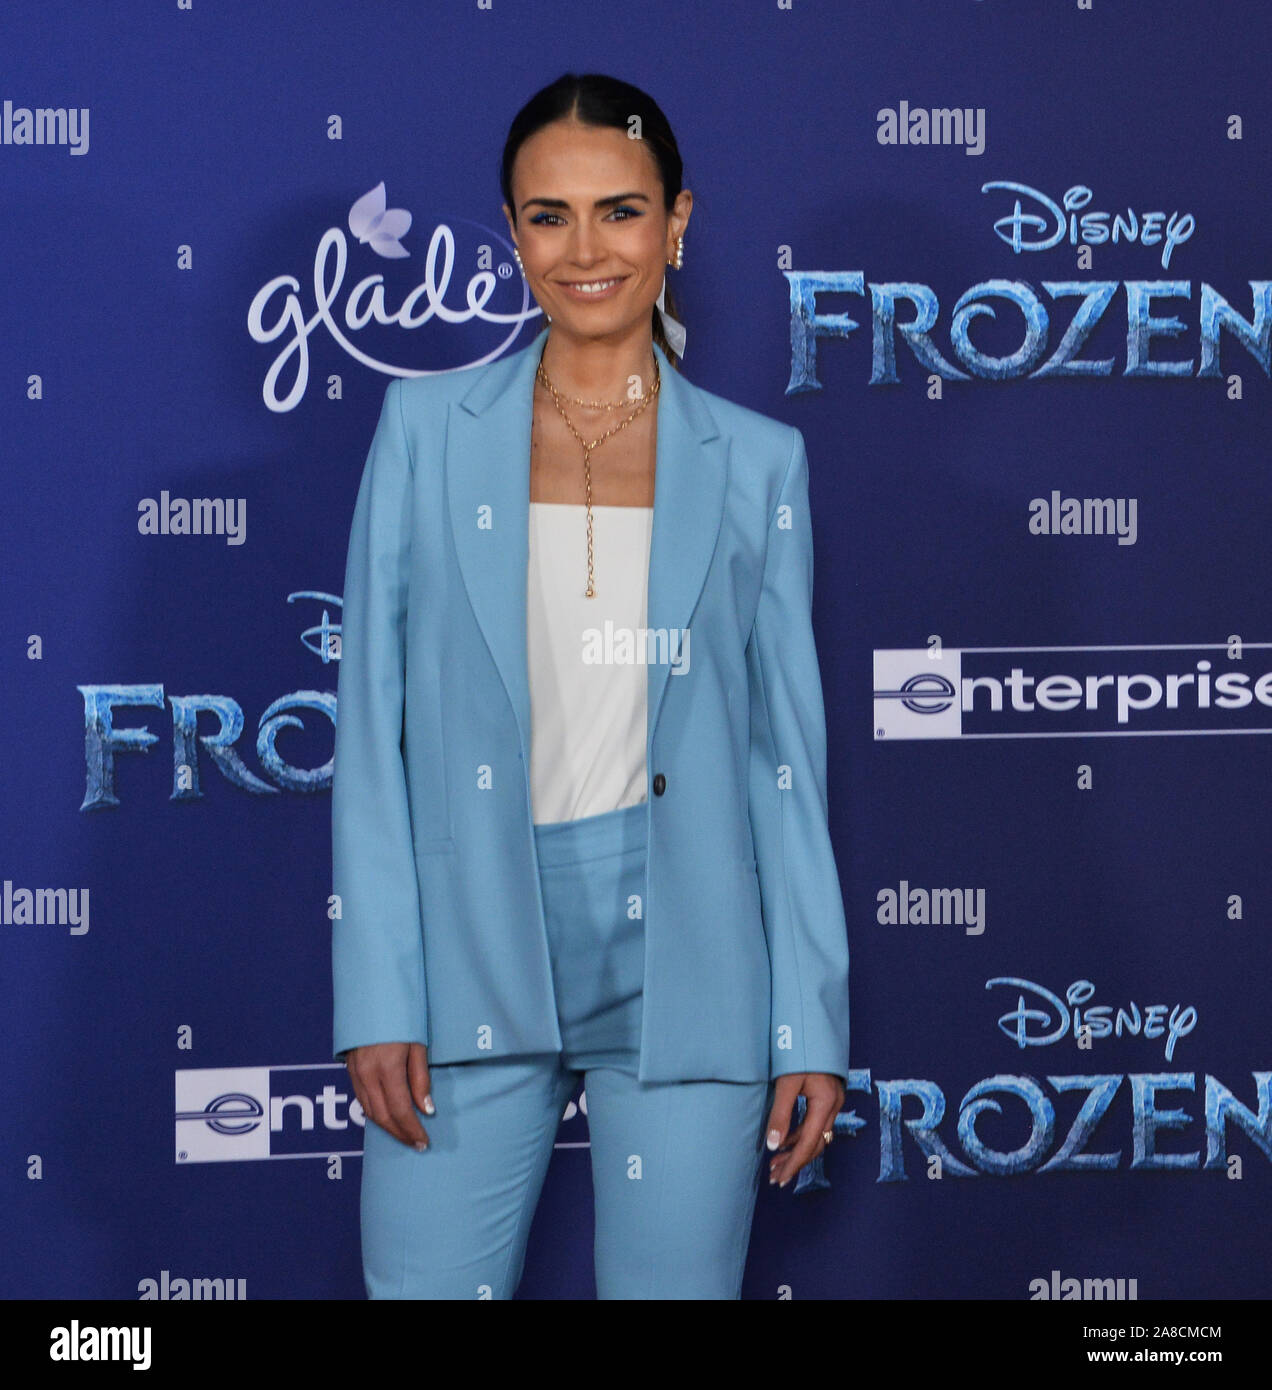 Los Angeles, United States. 08th Nov, 2019. Jordana Brewster attends the premiere of the animated musical comedy 'Frozen II' premiere at the Dolby Theatre in the Hollywood section of Los Angeles on Thursday, November 7, 2019. Storyline: Anna, Elsa, Kristoff, Olaf and Sven leave Arendelle to travel to an ancient, autumn-bound forest of an enchanted land. They set out to find the origin of Elsa's powers in order to save their kingdom. Photo by Jim Ruymen/UPI Credit: UPI/Alamy Live News Stock Photo